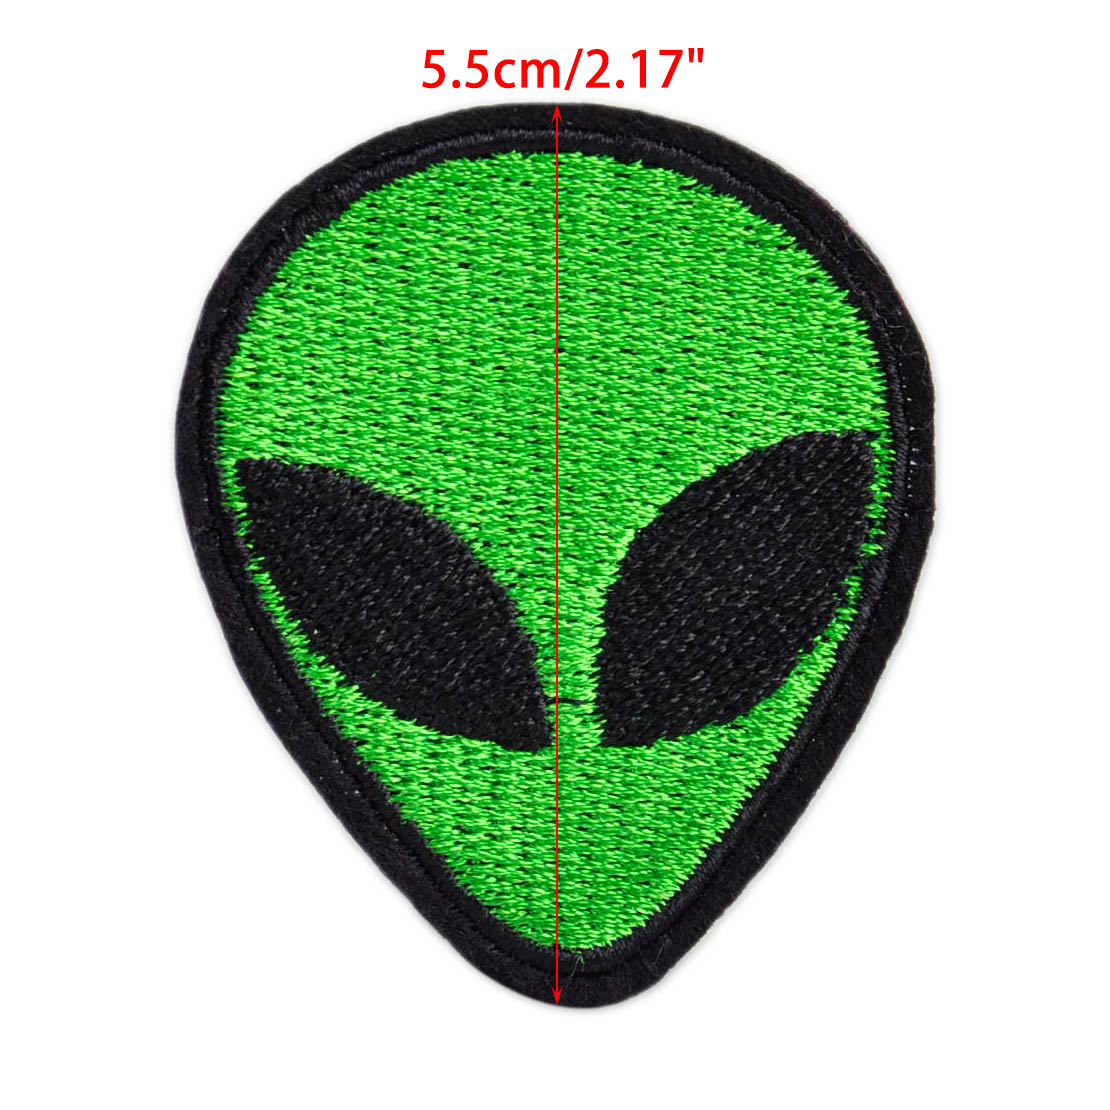 Green Alien Head UFO Patch Embroidery Applique Badge Sew Iron On Fabric ...